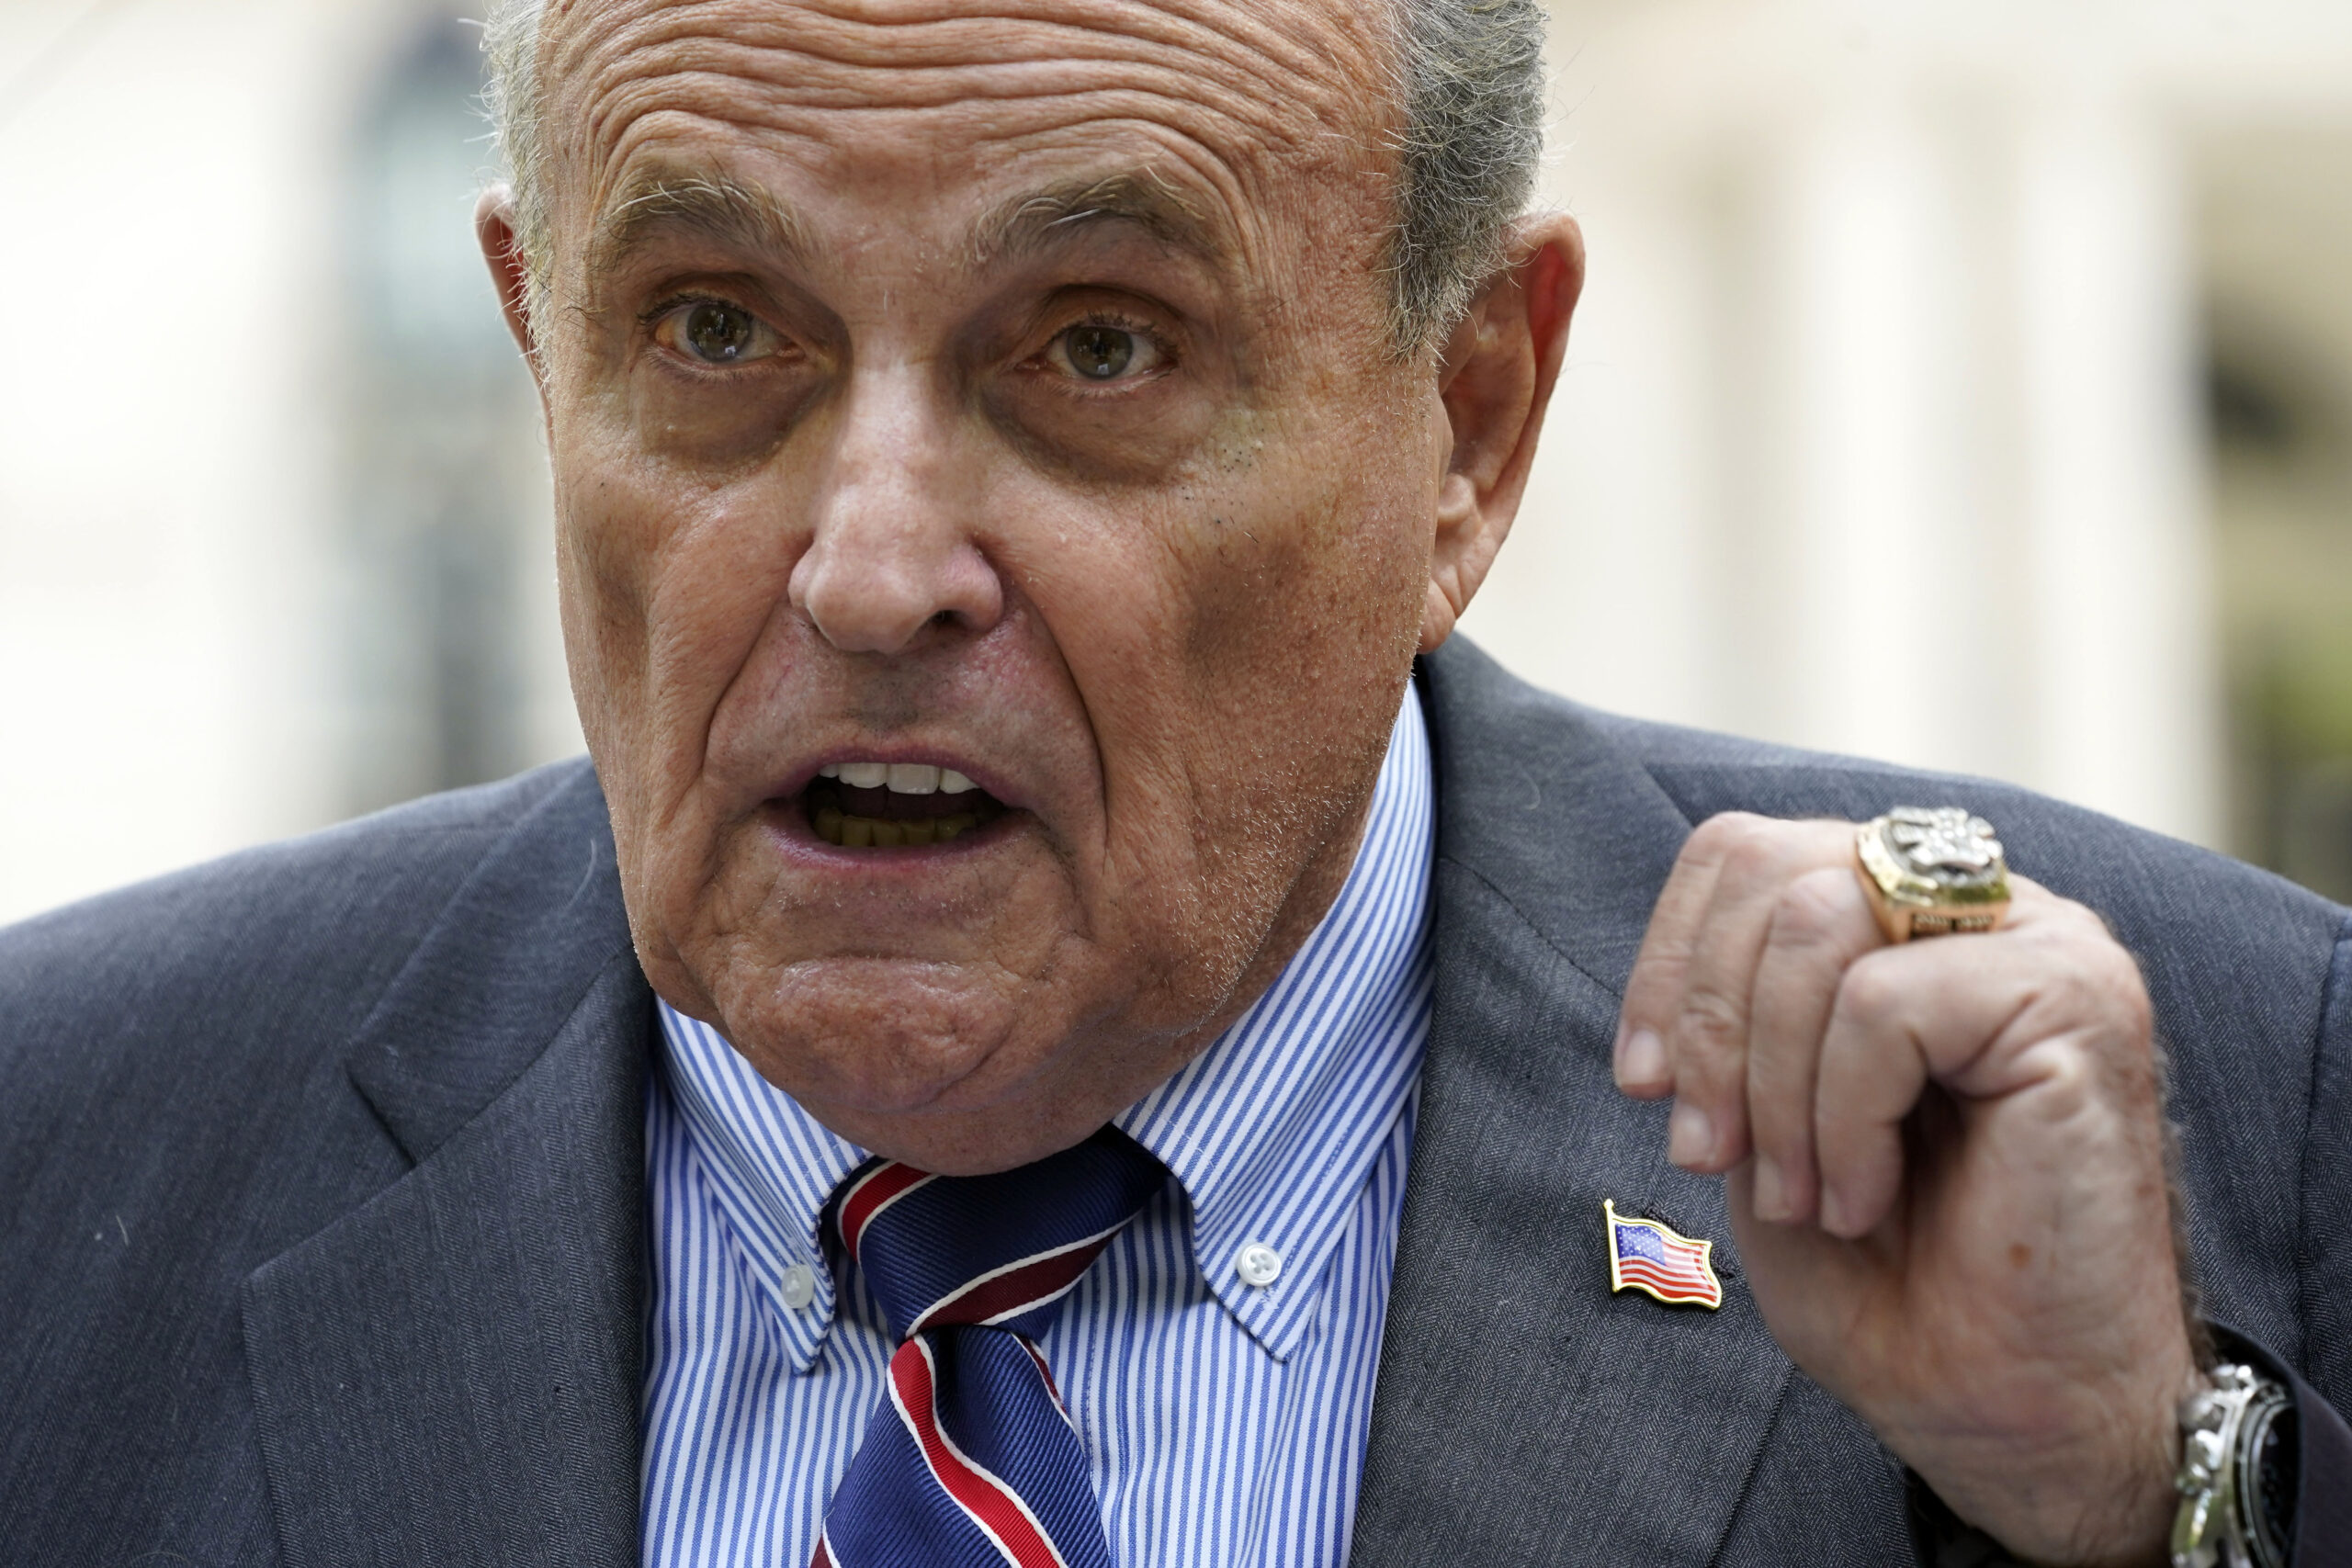 Are Mary Giuliani And Rudy Giuliani Related To Each Other? Family Tree